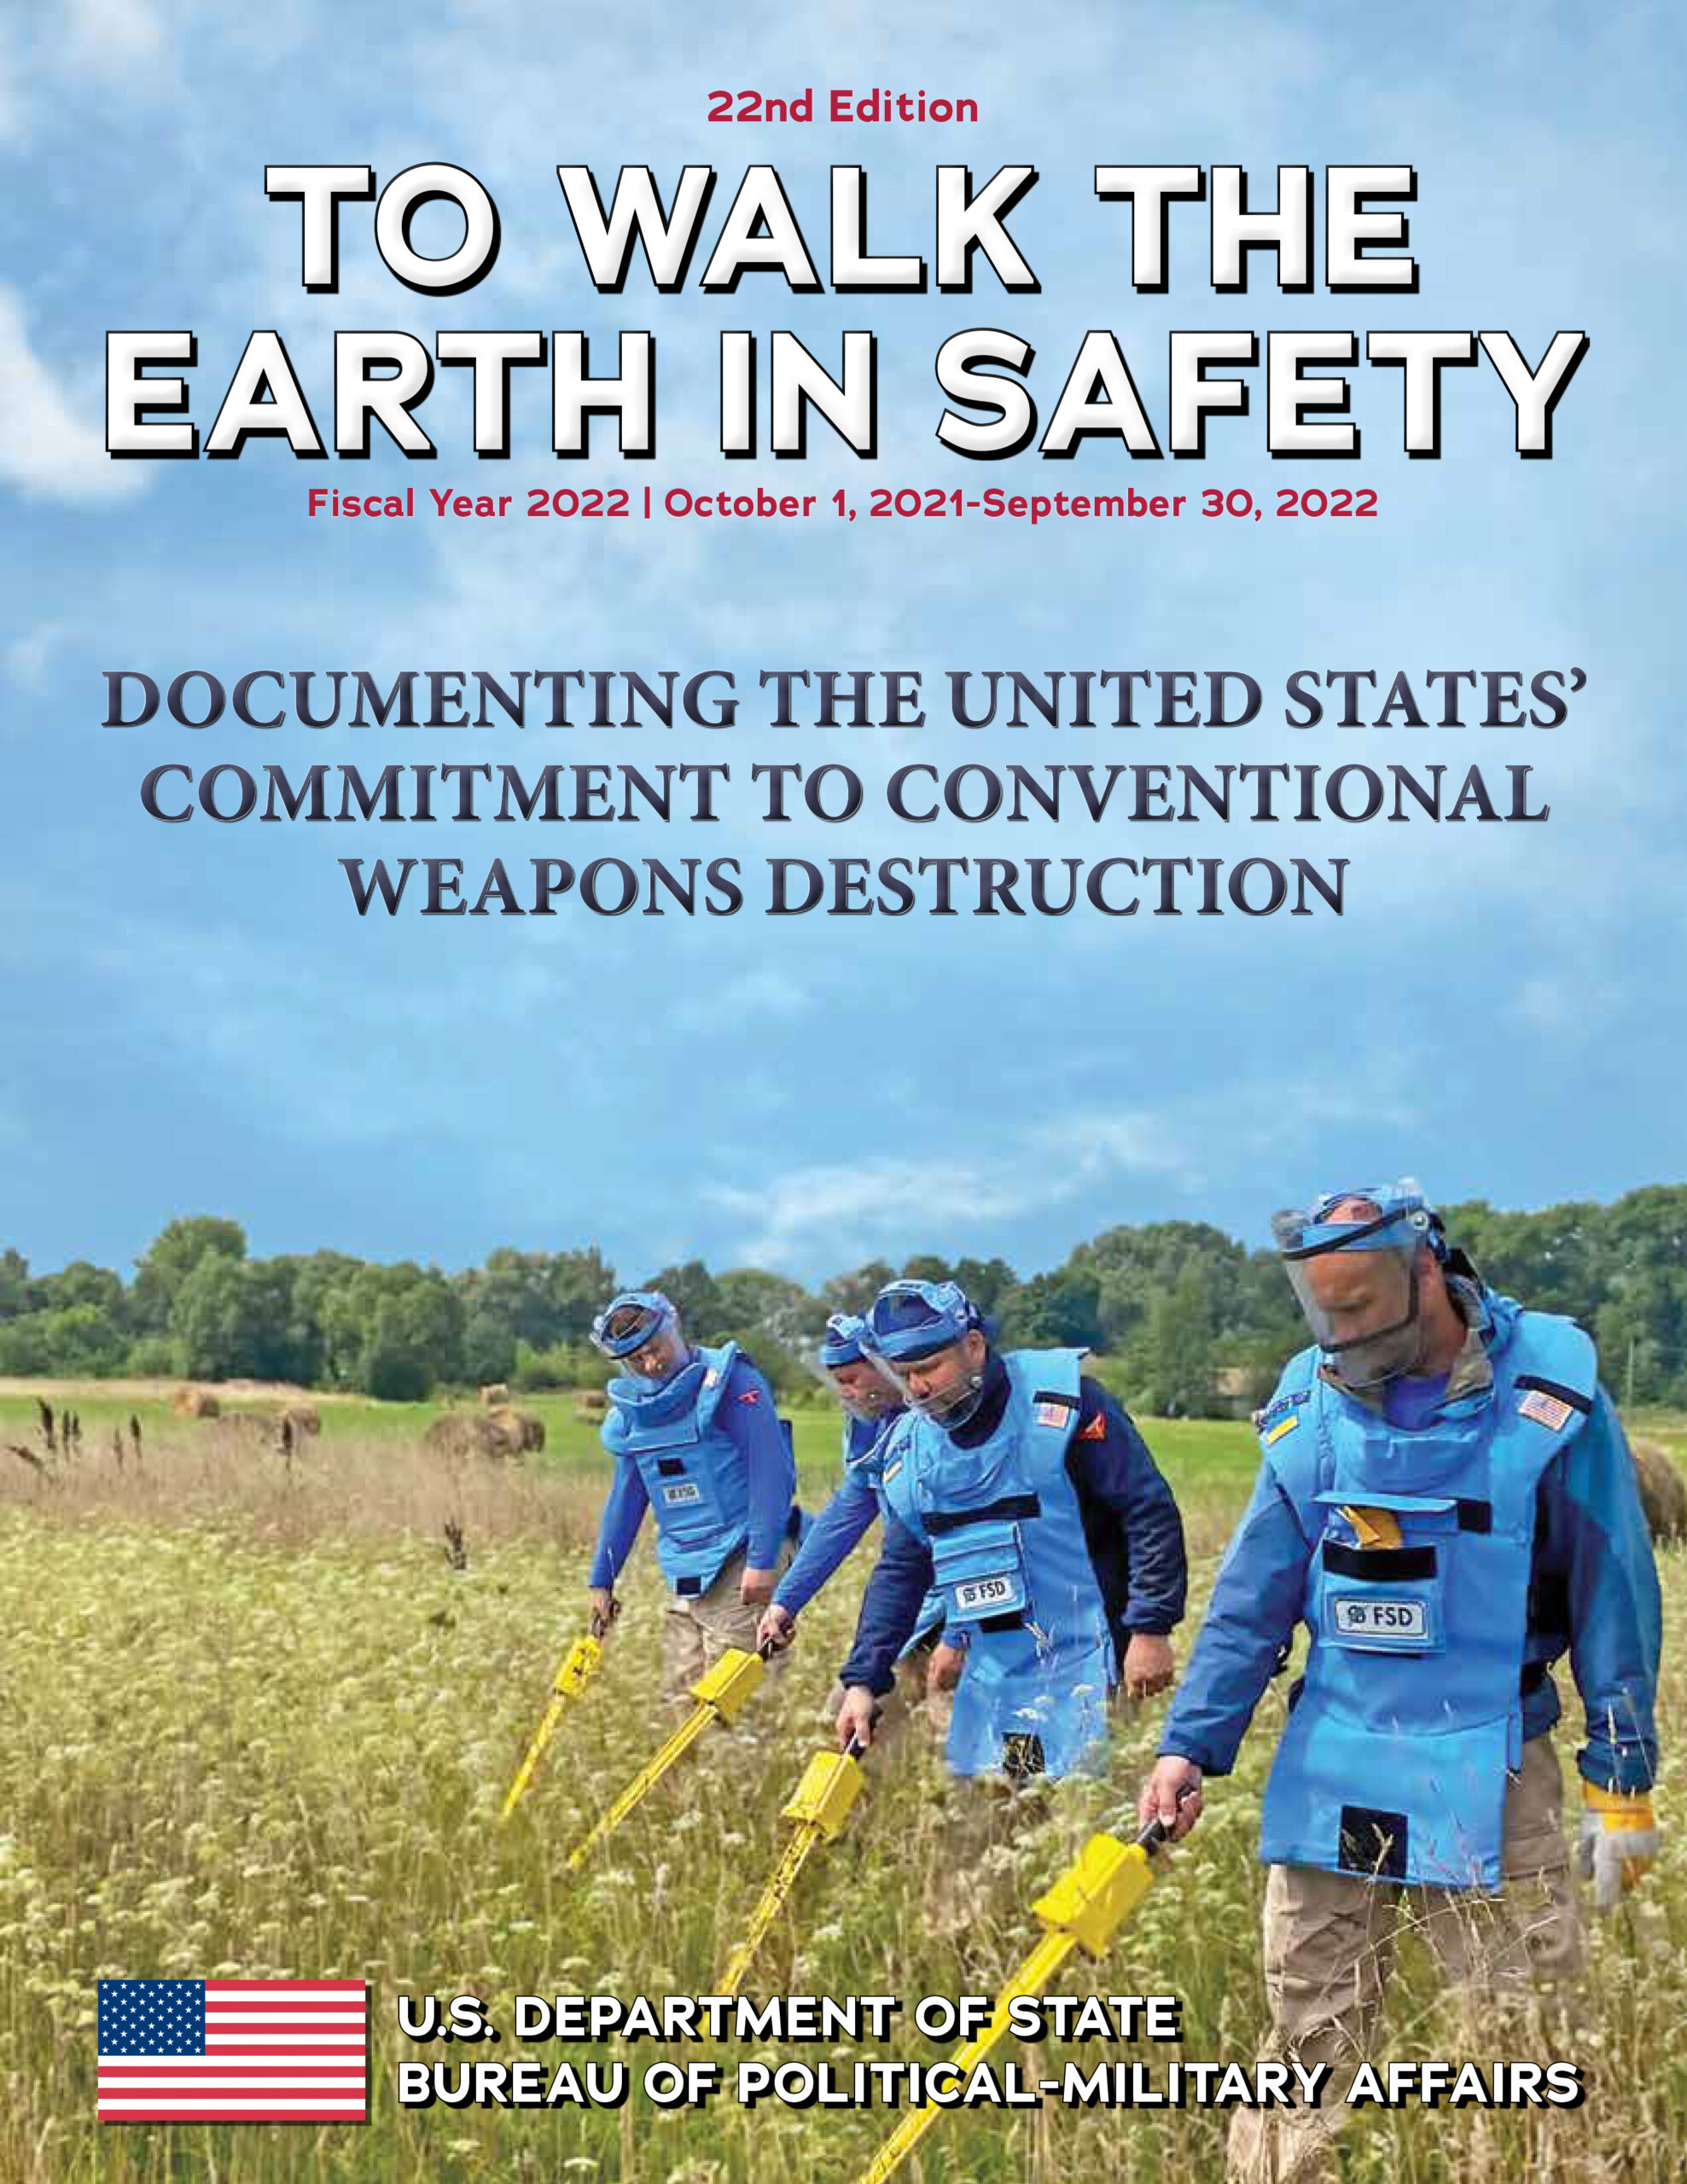 22nd Edition To Walk the Earth in Safety Fiscal Year 2022 October 1, 2021-September 30, 2022 Documenting the United States’ Commitment to Conventional Weapons Destruction U.S. Department of State Bureau of Political-Military Affairs